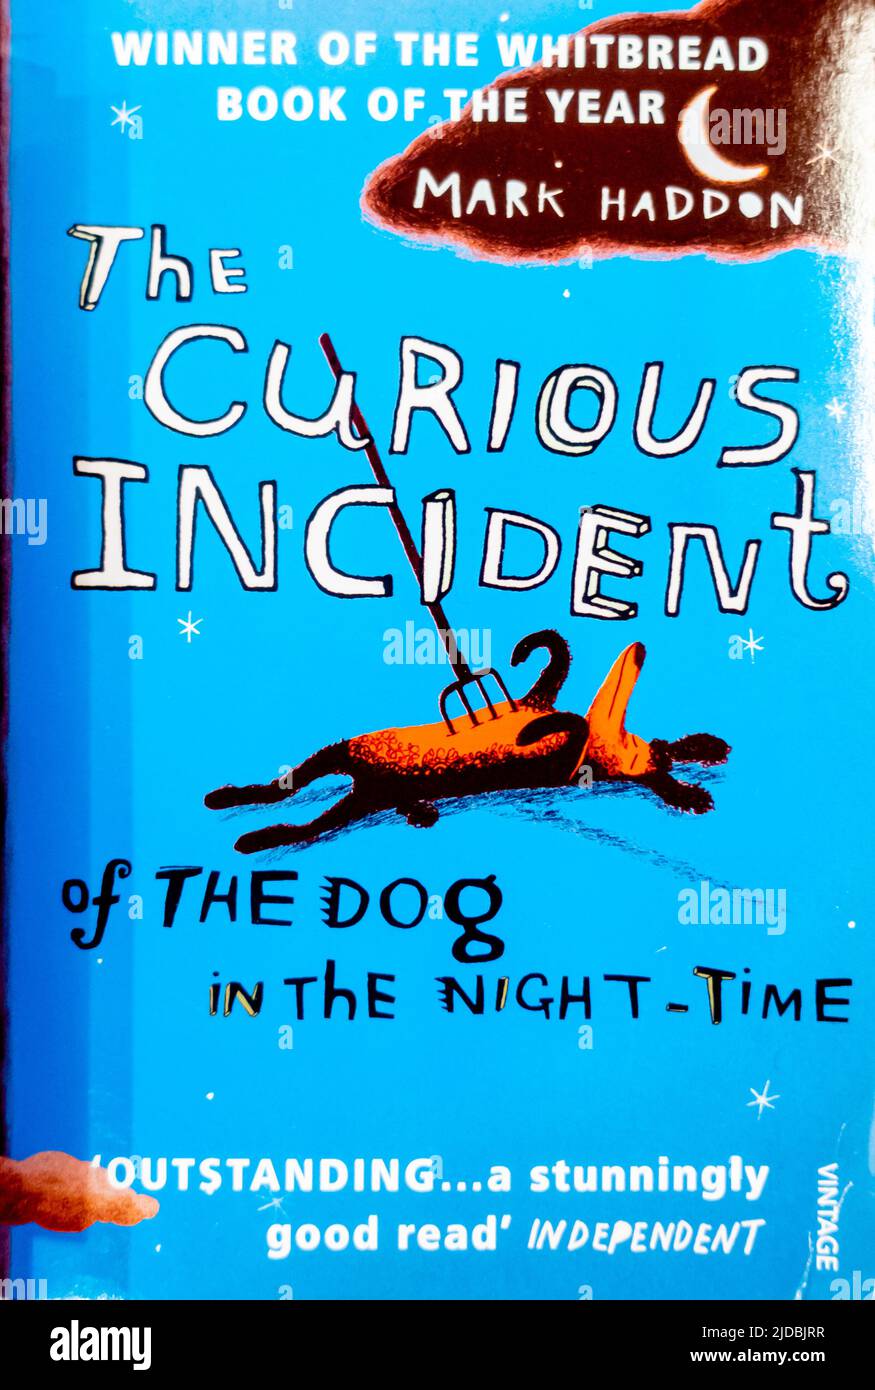 The Curious Incident of the Dog in the Night-Time -  Mark Haddon - book cover - 2003 Stock Photo